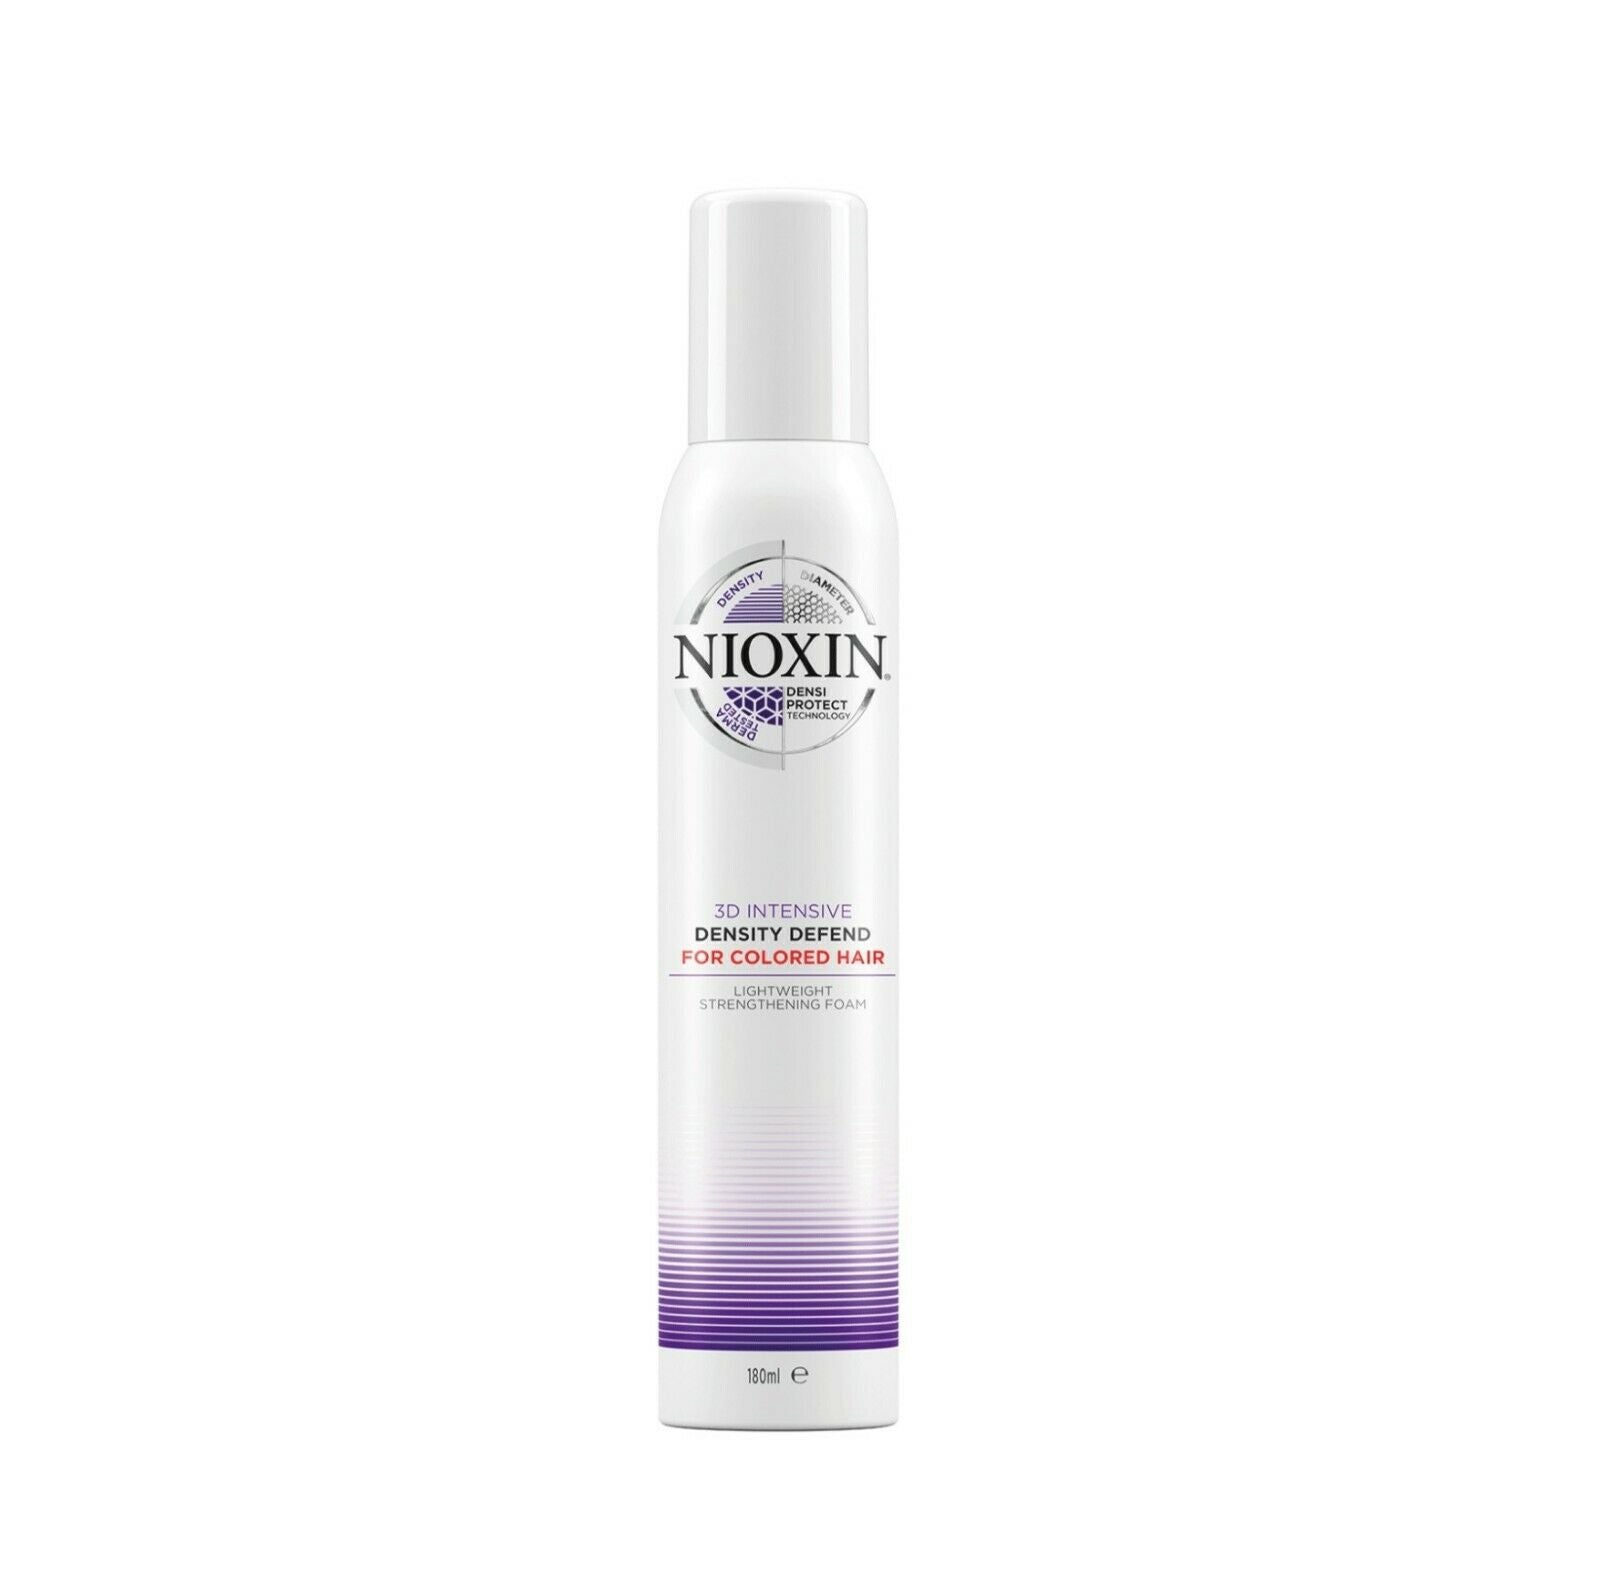 Nioxin 3D Density Defend for Colored Hair Mousse Lightweight Strengthen Nioxin Professional - On Line Hair Depot